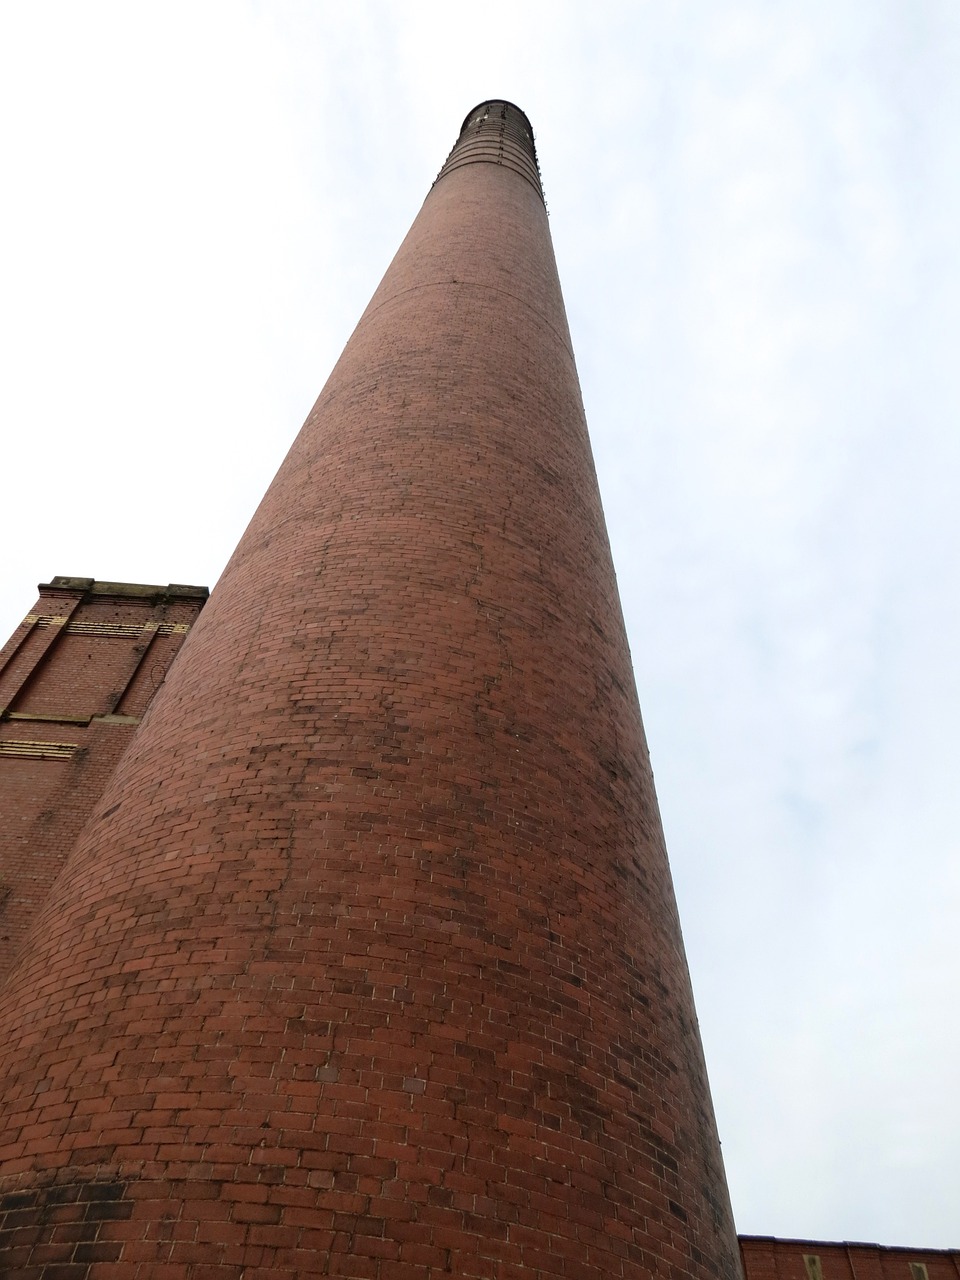 factory chimney industry free photo